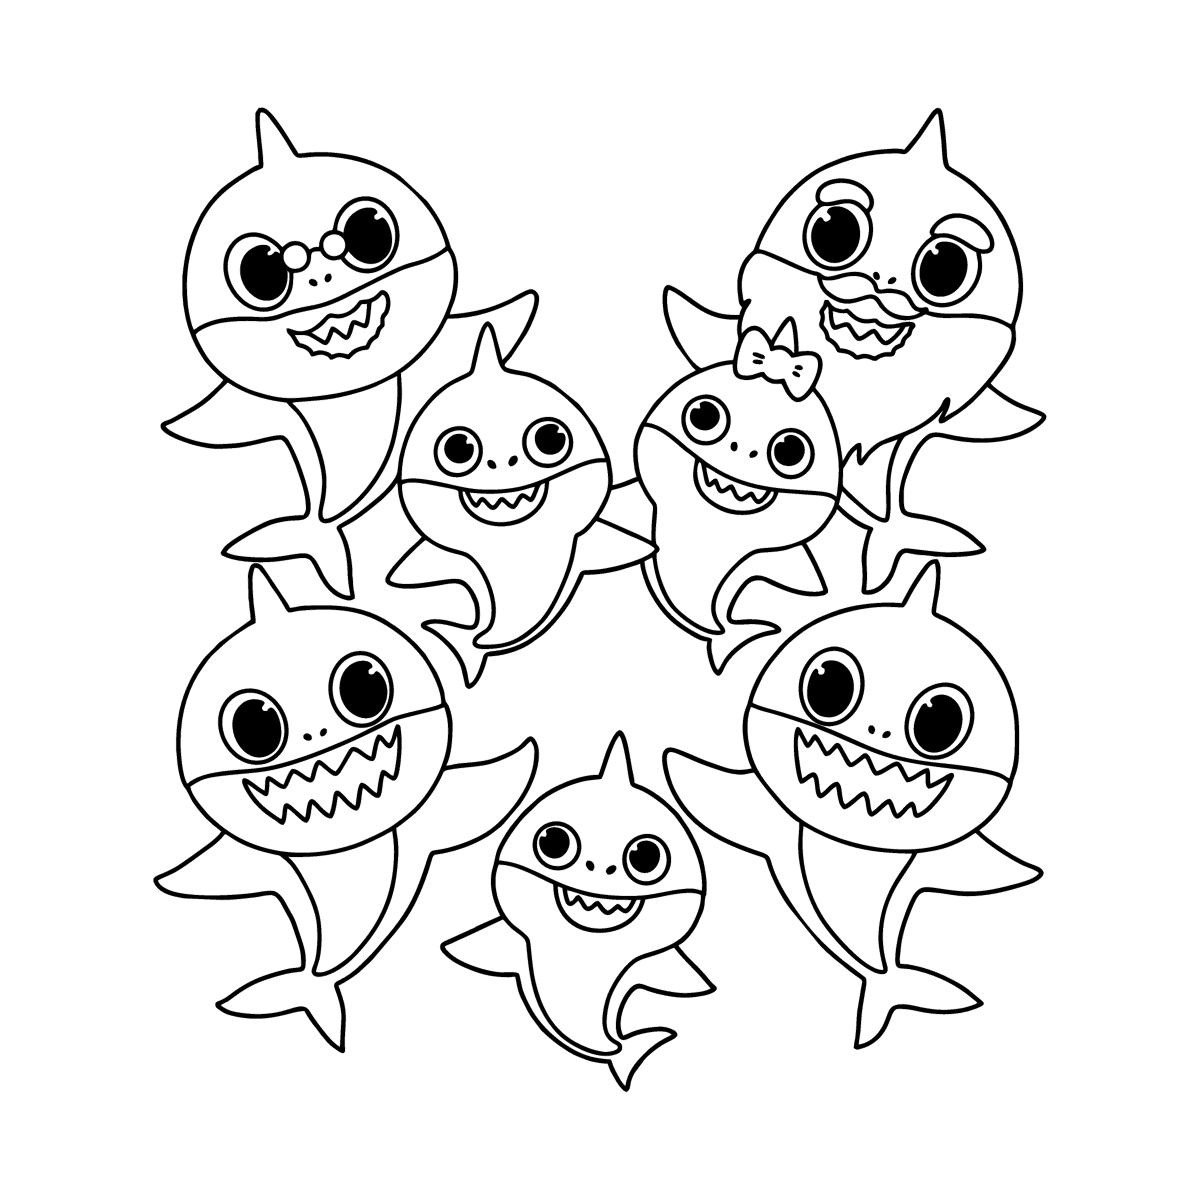 Baby shark Big family coloring page ♥ Online and Print for Free